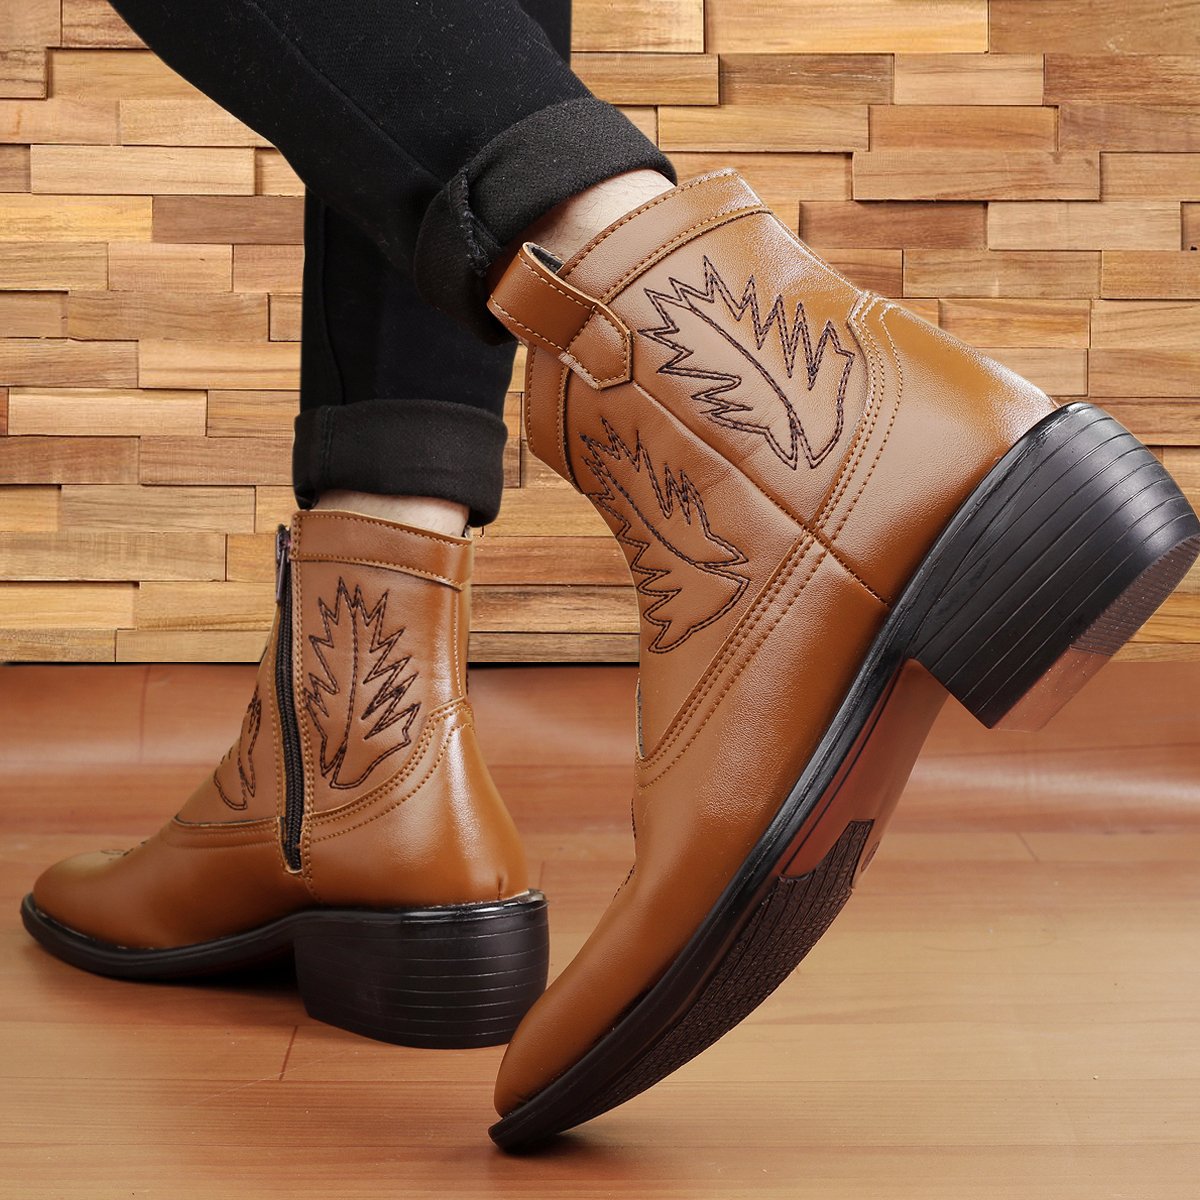 Men's Formal And Casual Retro Boots